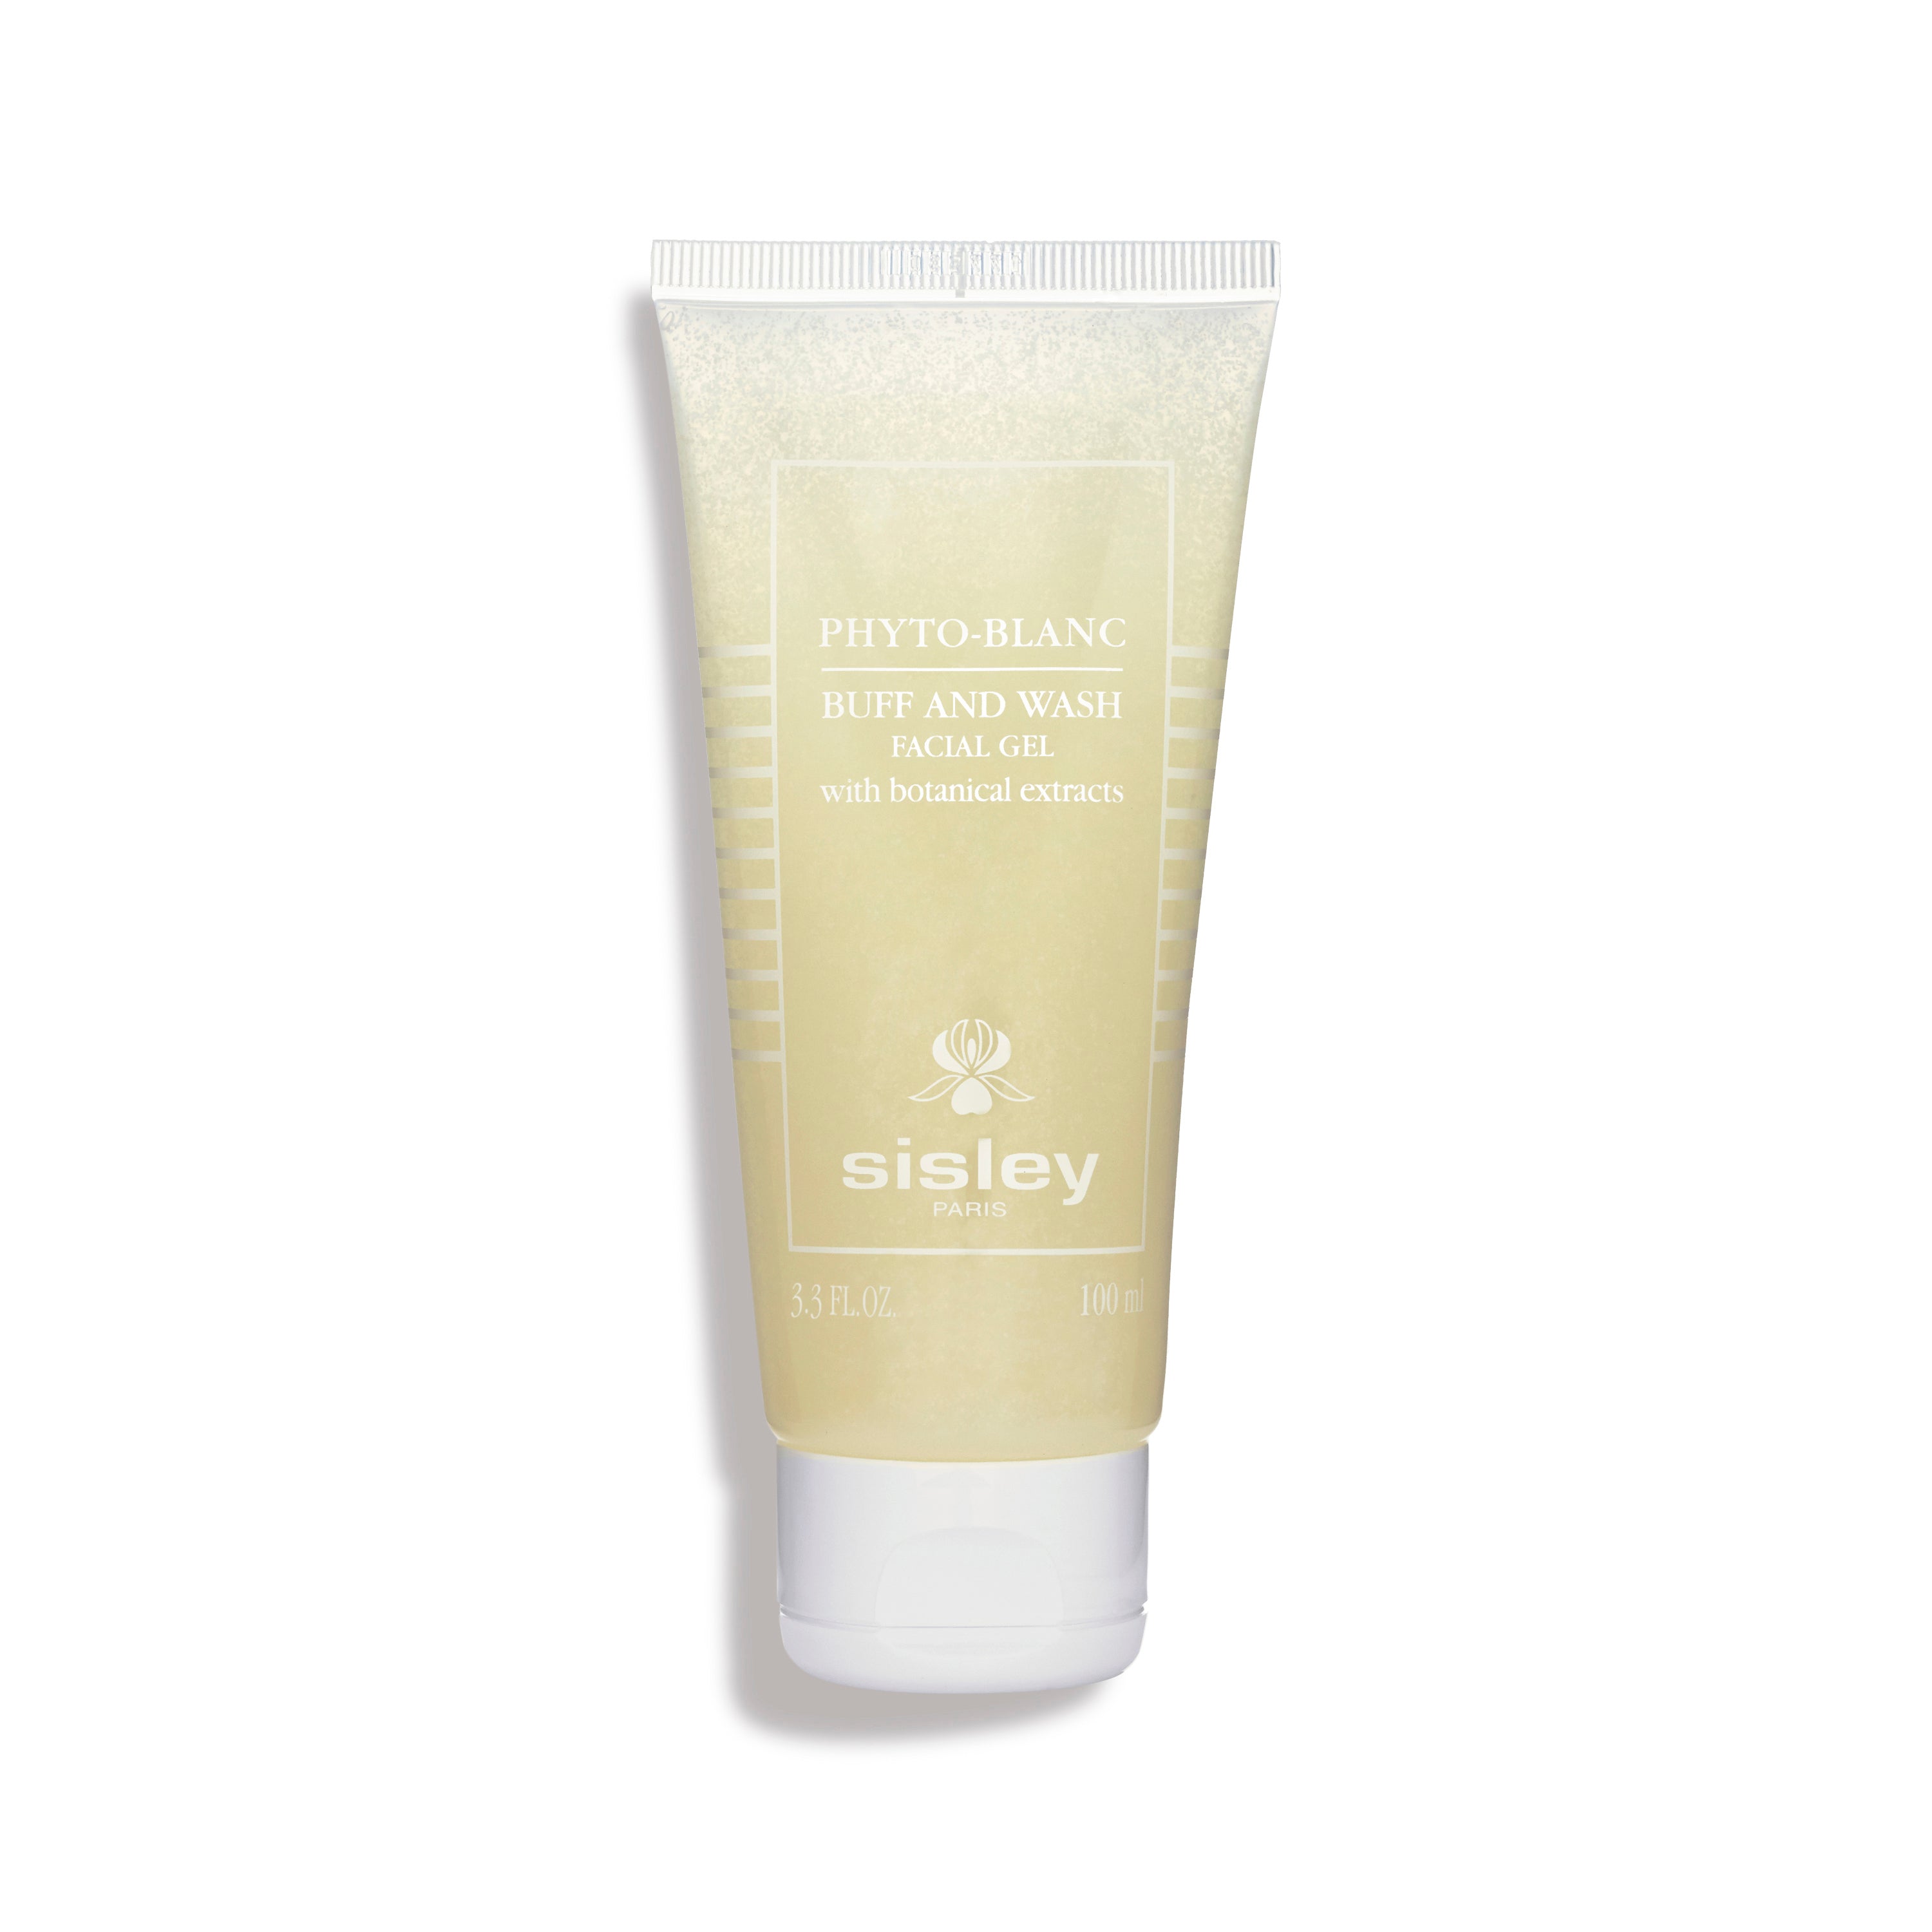 Sisley Phyto-Blanc Buff and Wash Facial Gel with Botanical Extracts - 100ml